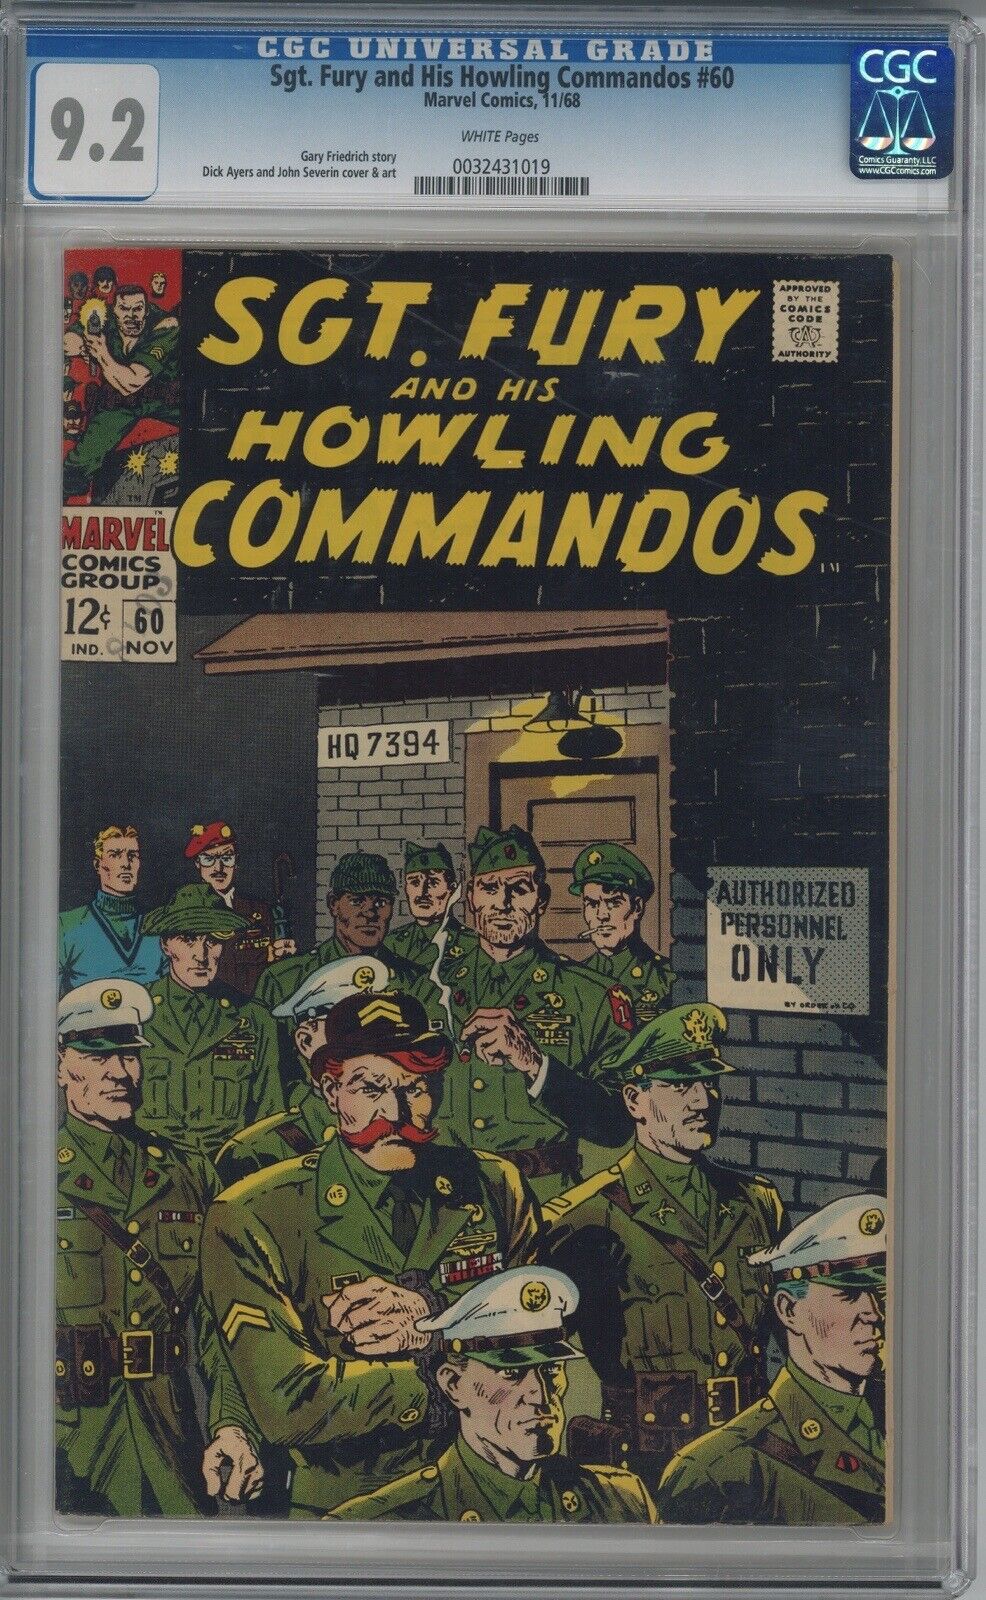 SGT. FURY AND HIS HOWLING COMMANDOS #60 CGC 9.2 NM- Unpressed Silver Age 1968